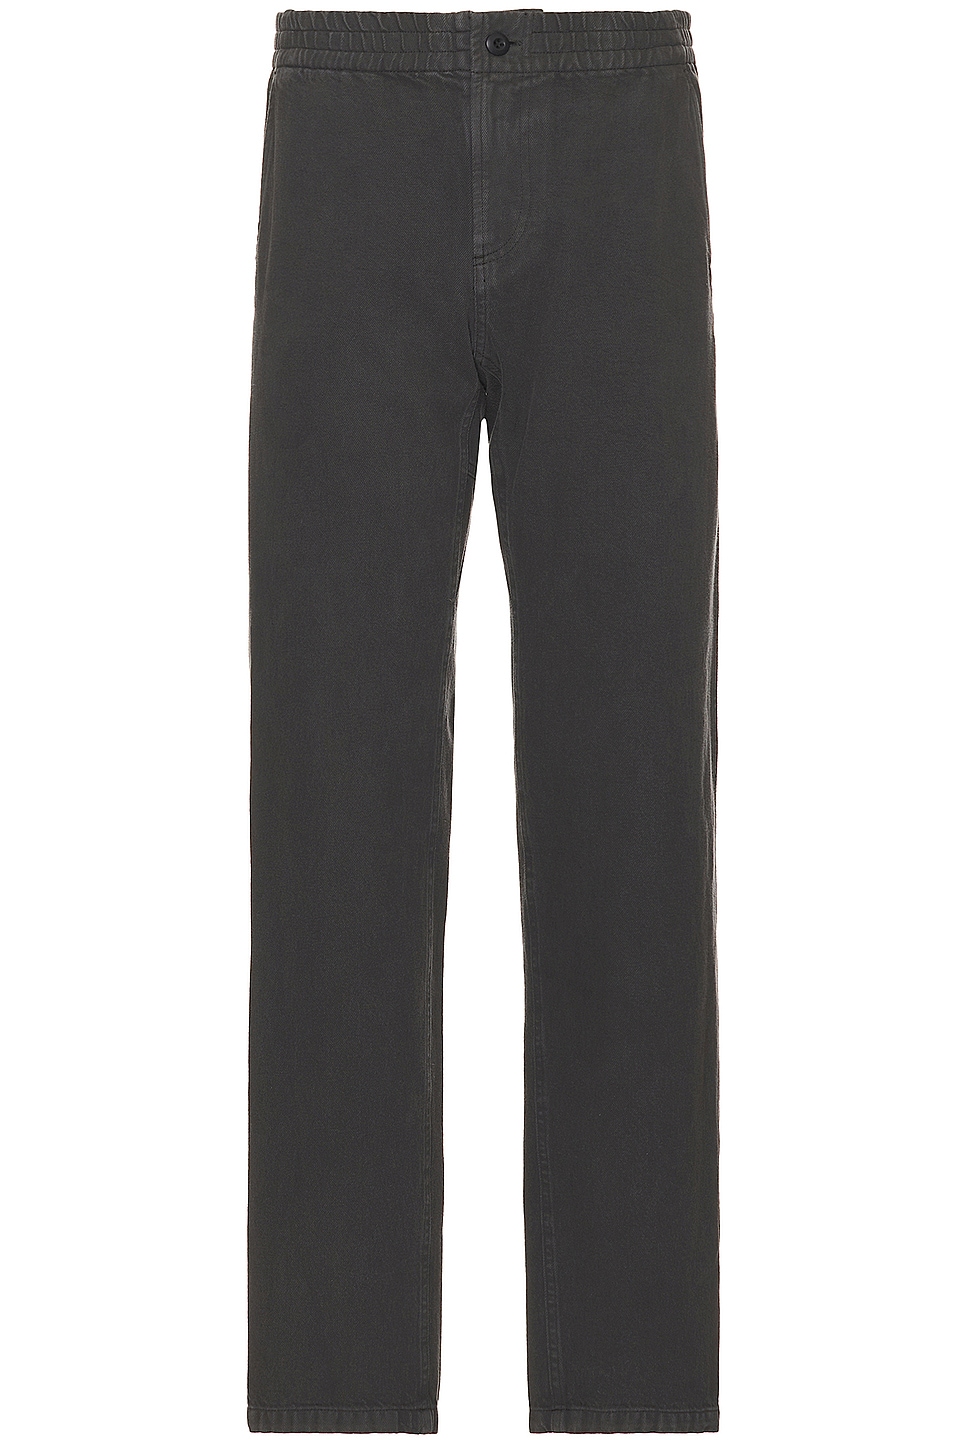 Image 1 of A.P.C. Pantalon Chuck in Anthracite